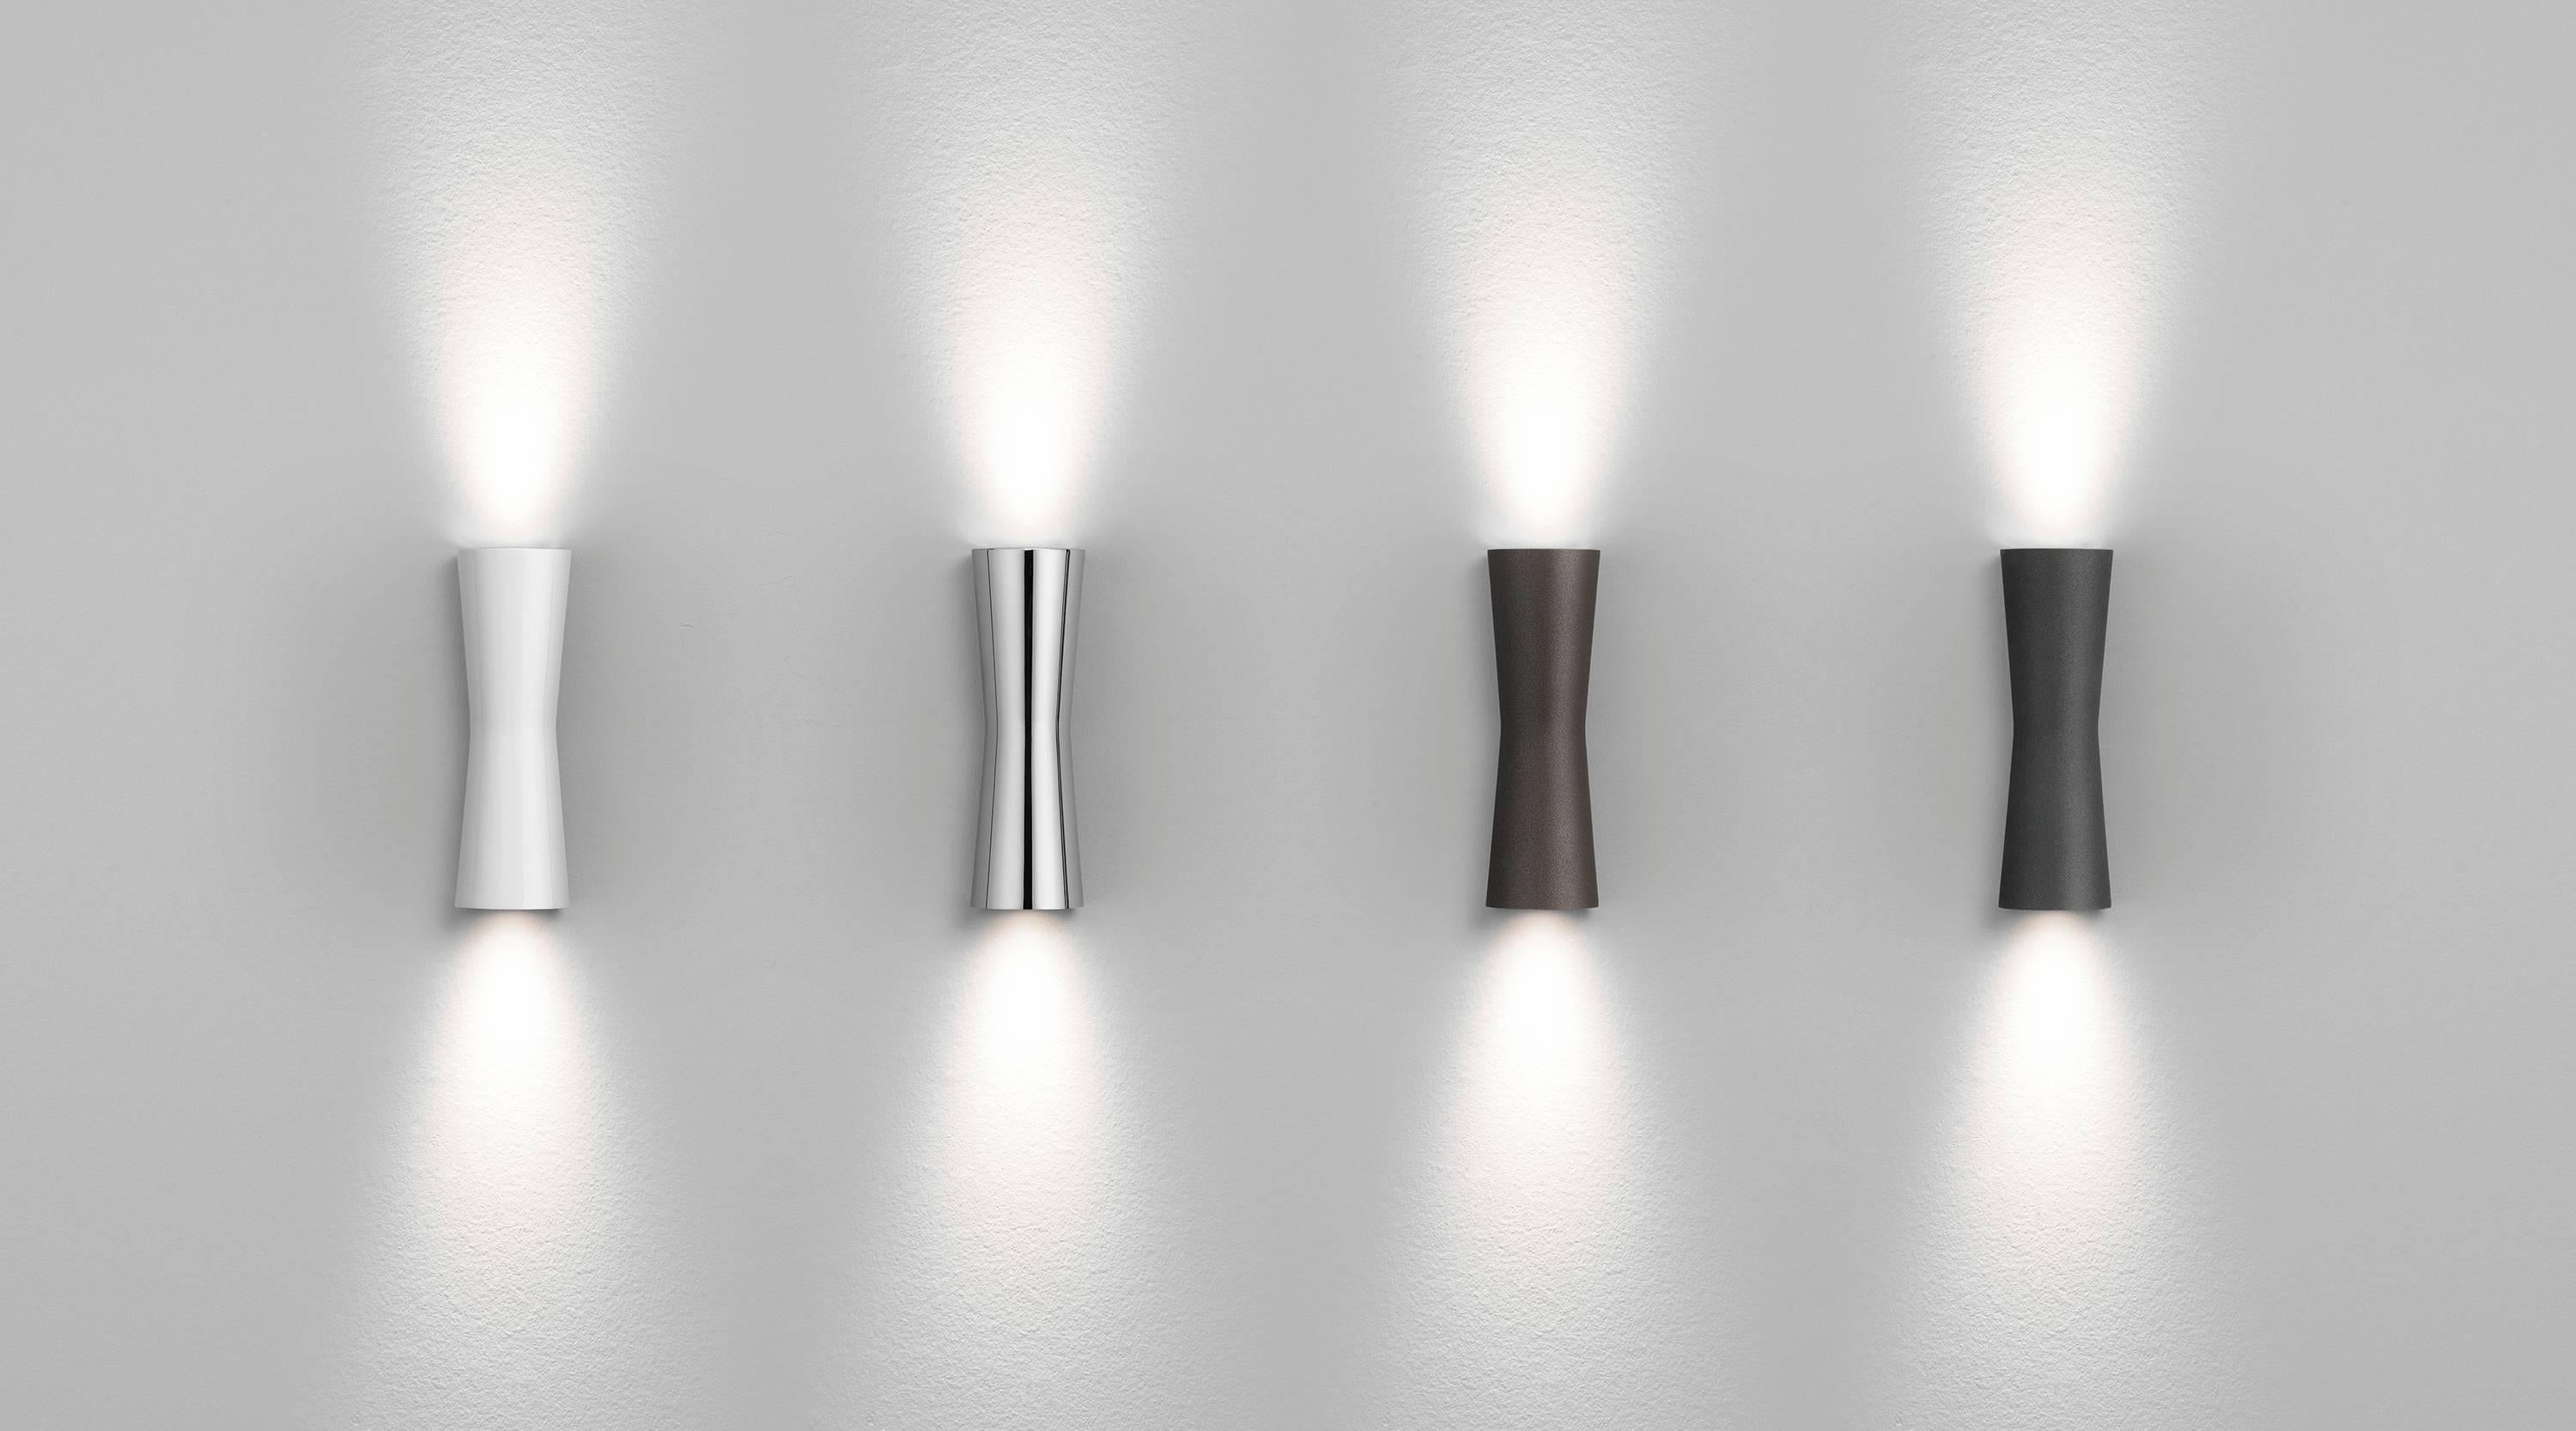 Inspired by the shape of the hourglass, the Clessidra lamp from Antonio Citterio emits diffused direct and indirect light. This stunning wall light has a body made of die-cast aluminum with a powder-coated finish and a diffuser in PMMA (Polymethyl